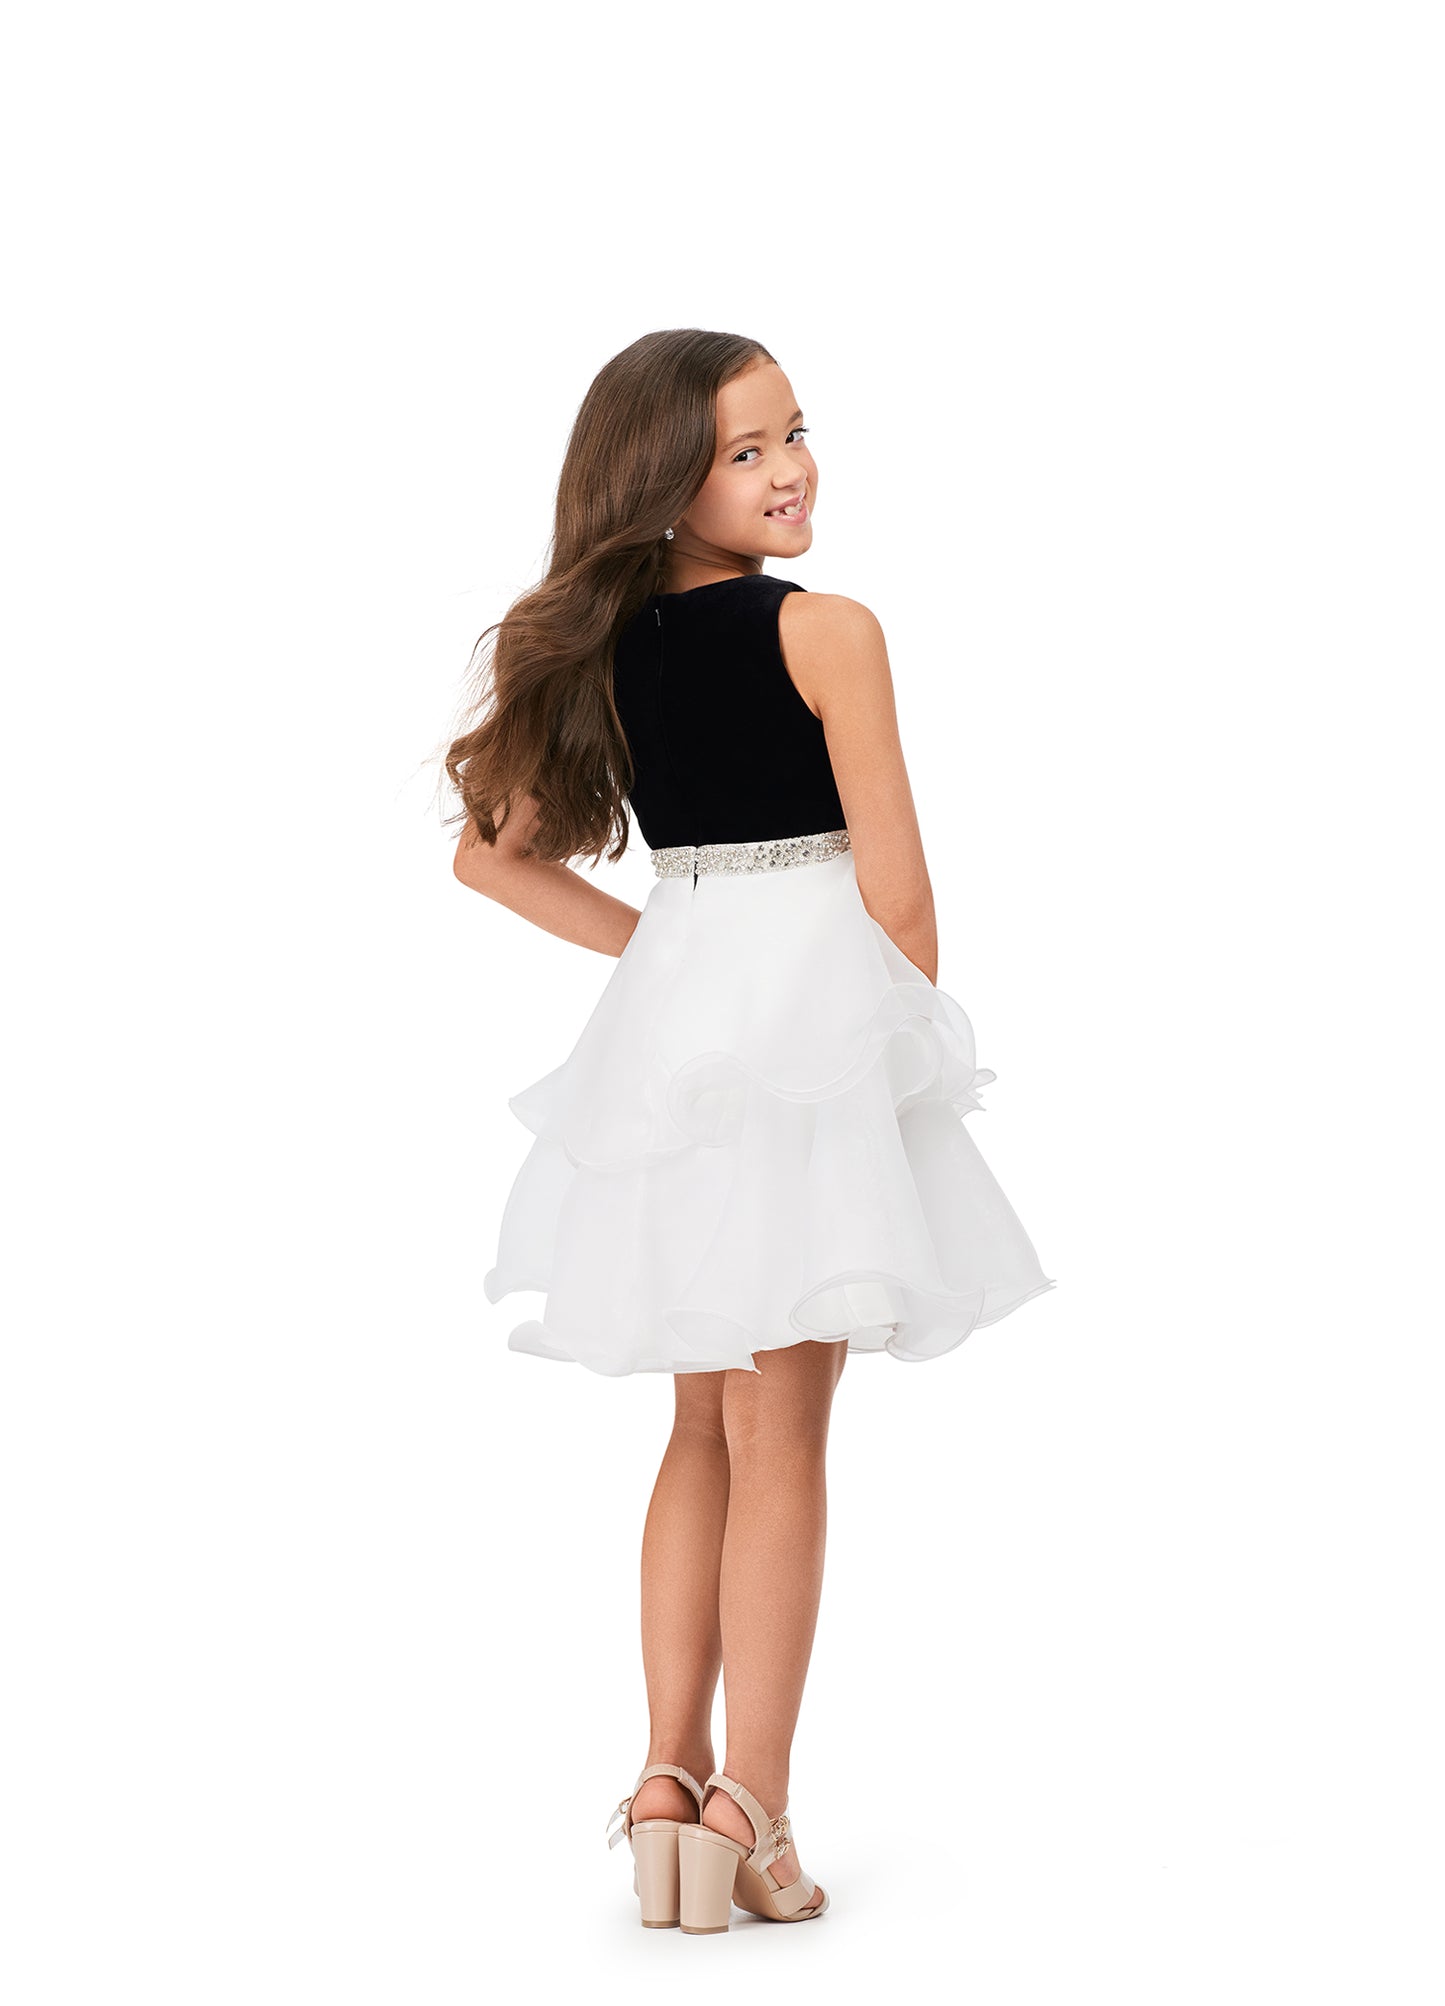 Ashley Lauren Kids 8216 Velvet Bustier And Organza Skirt Beaded Detail Crew Neckline Cocktail Dress. Elegant and adorable! This cocktail dress features a velvet bodice with a ruffled, layered organza skirt and a beaded waistband. We're in love!